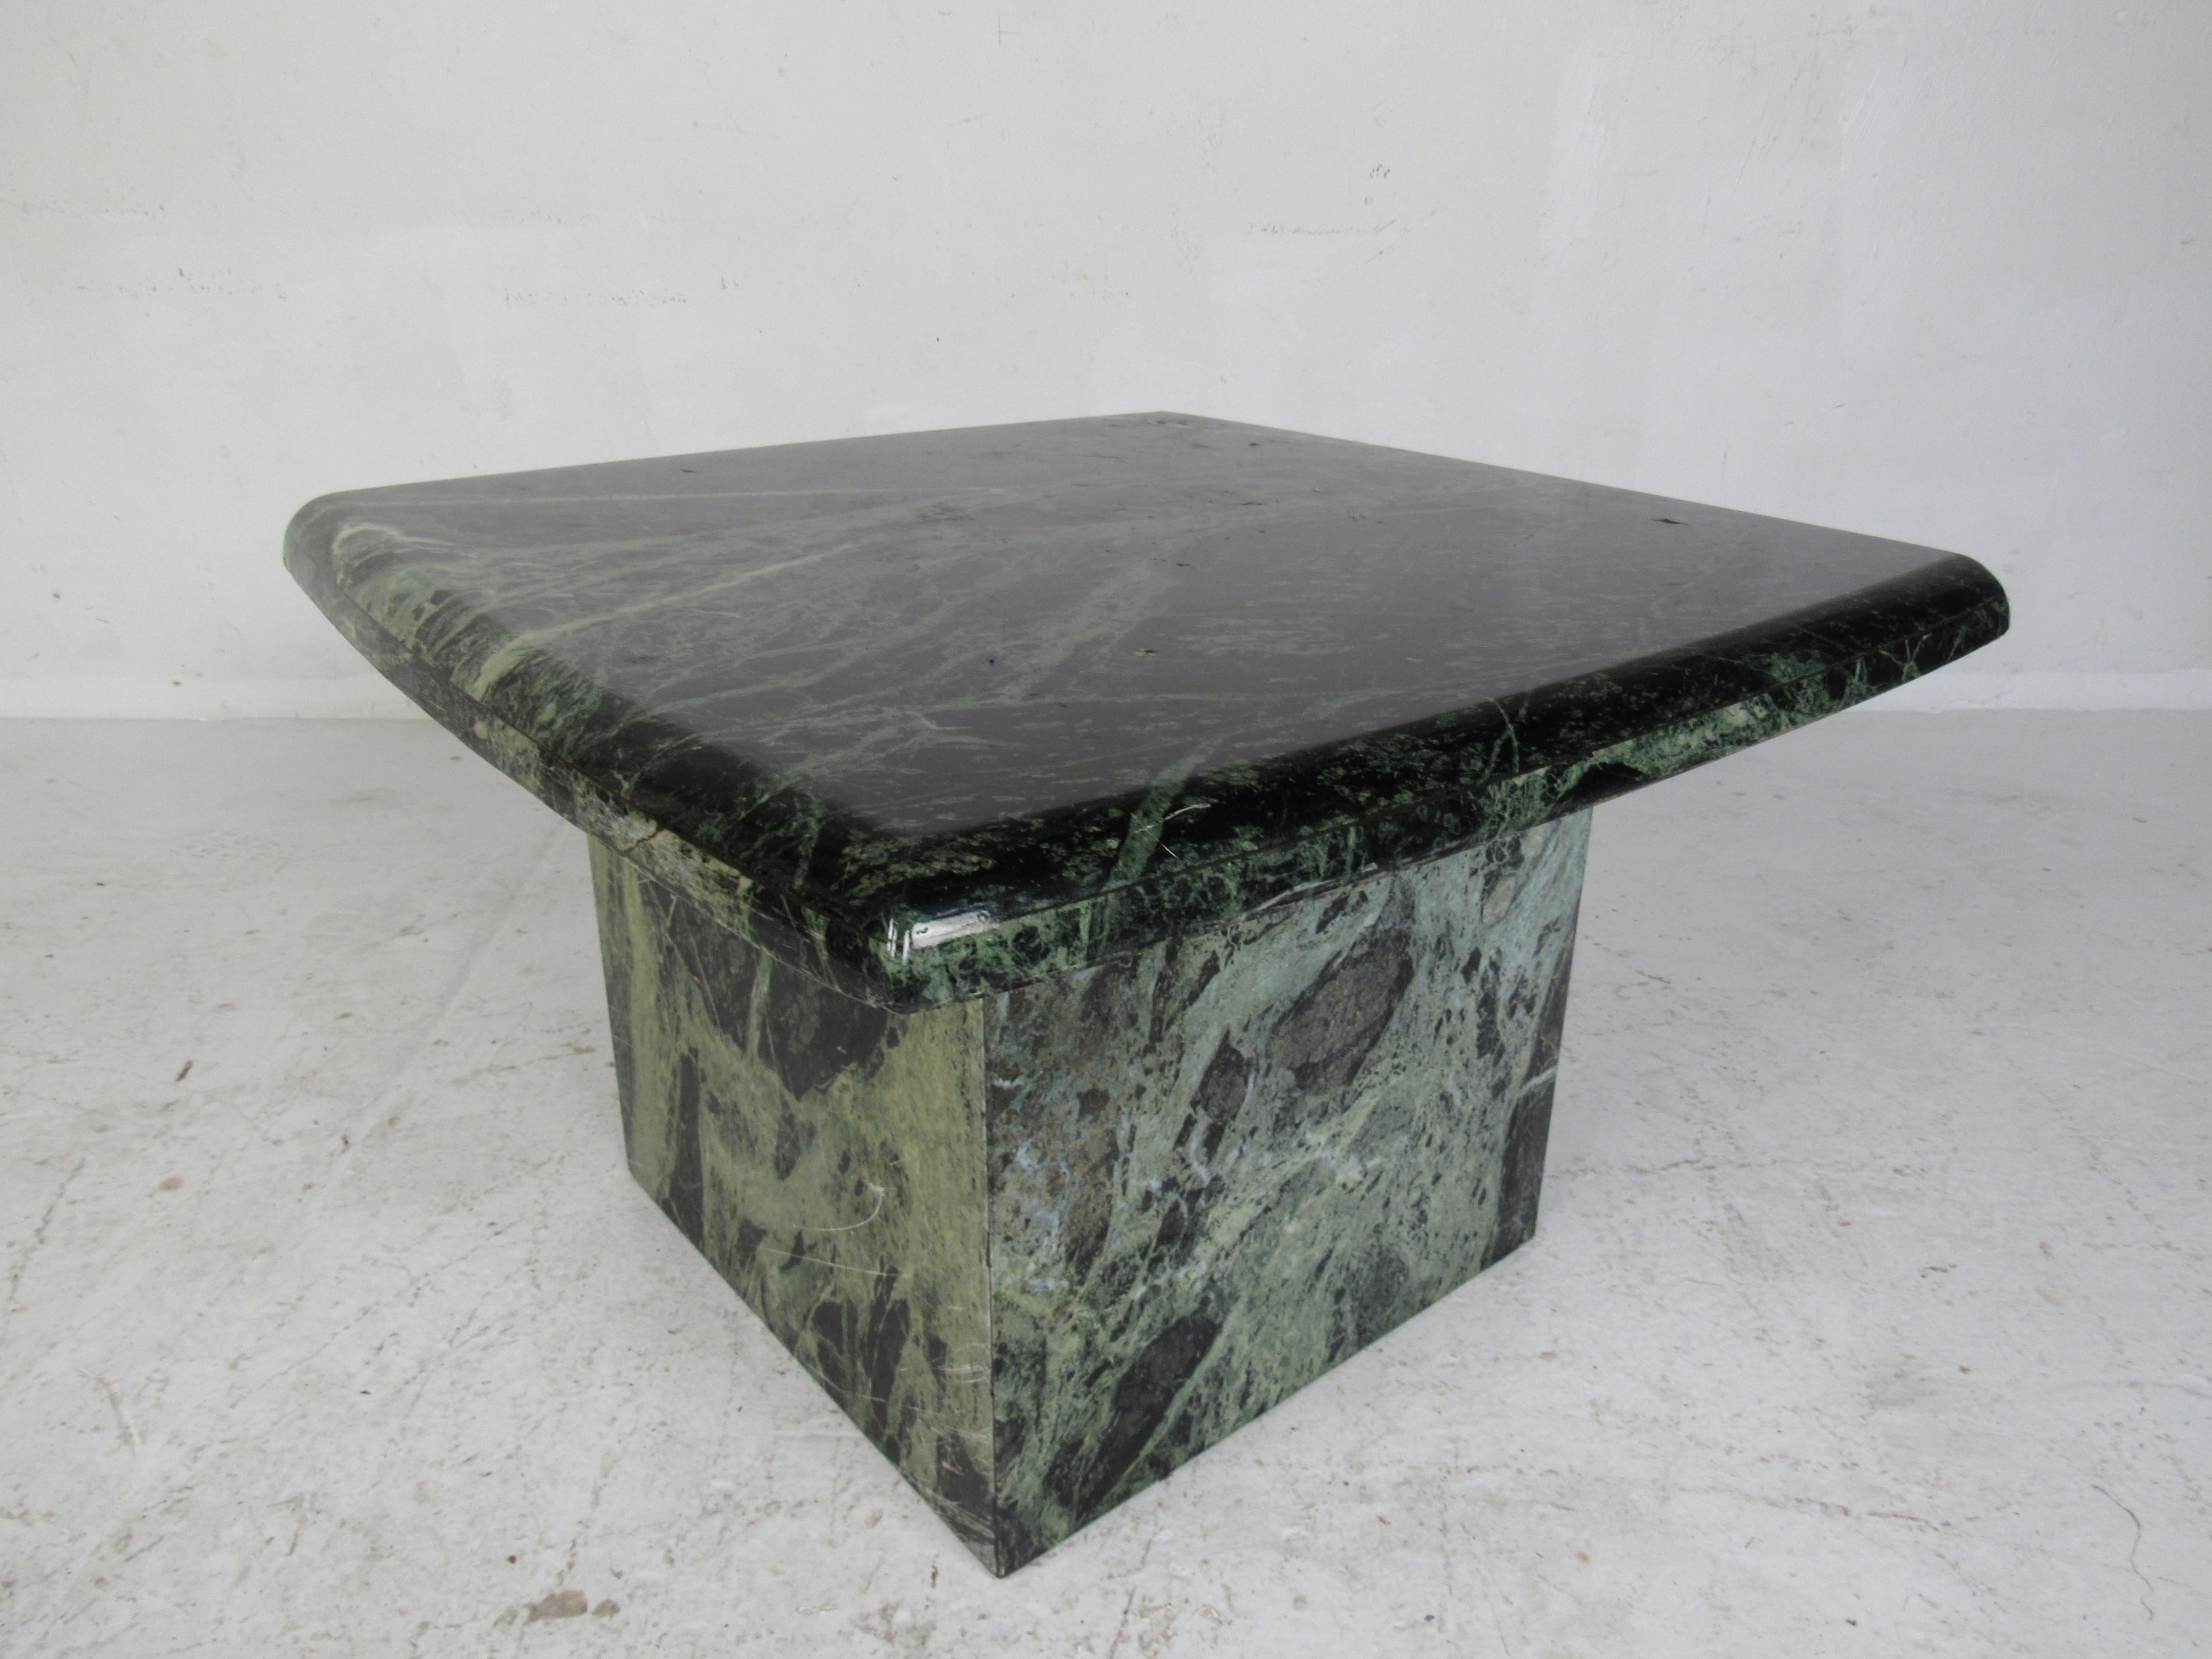 A stunning midcentury side table with a square marble top and a cube shaped pedestal base. A lovely green marble with smooth edges and unique grain. This elegant vintage end table makes the perfect addition to any home, business, or office. Please